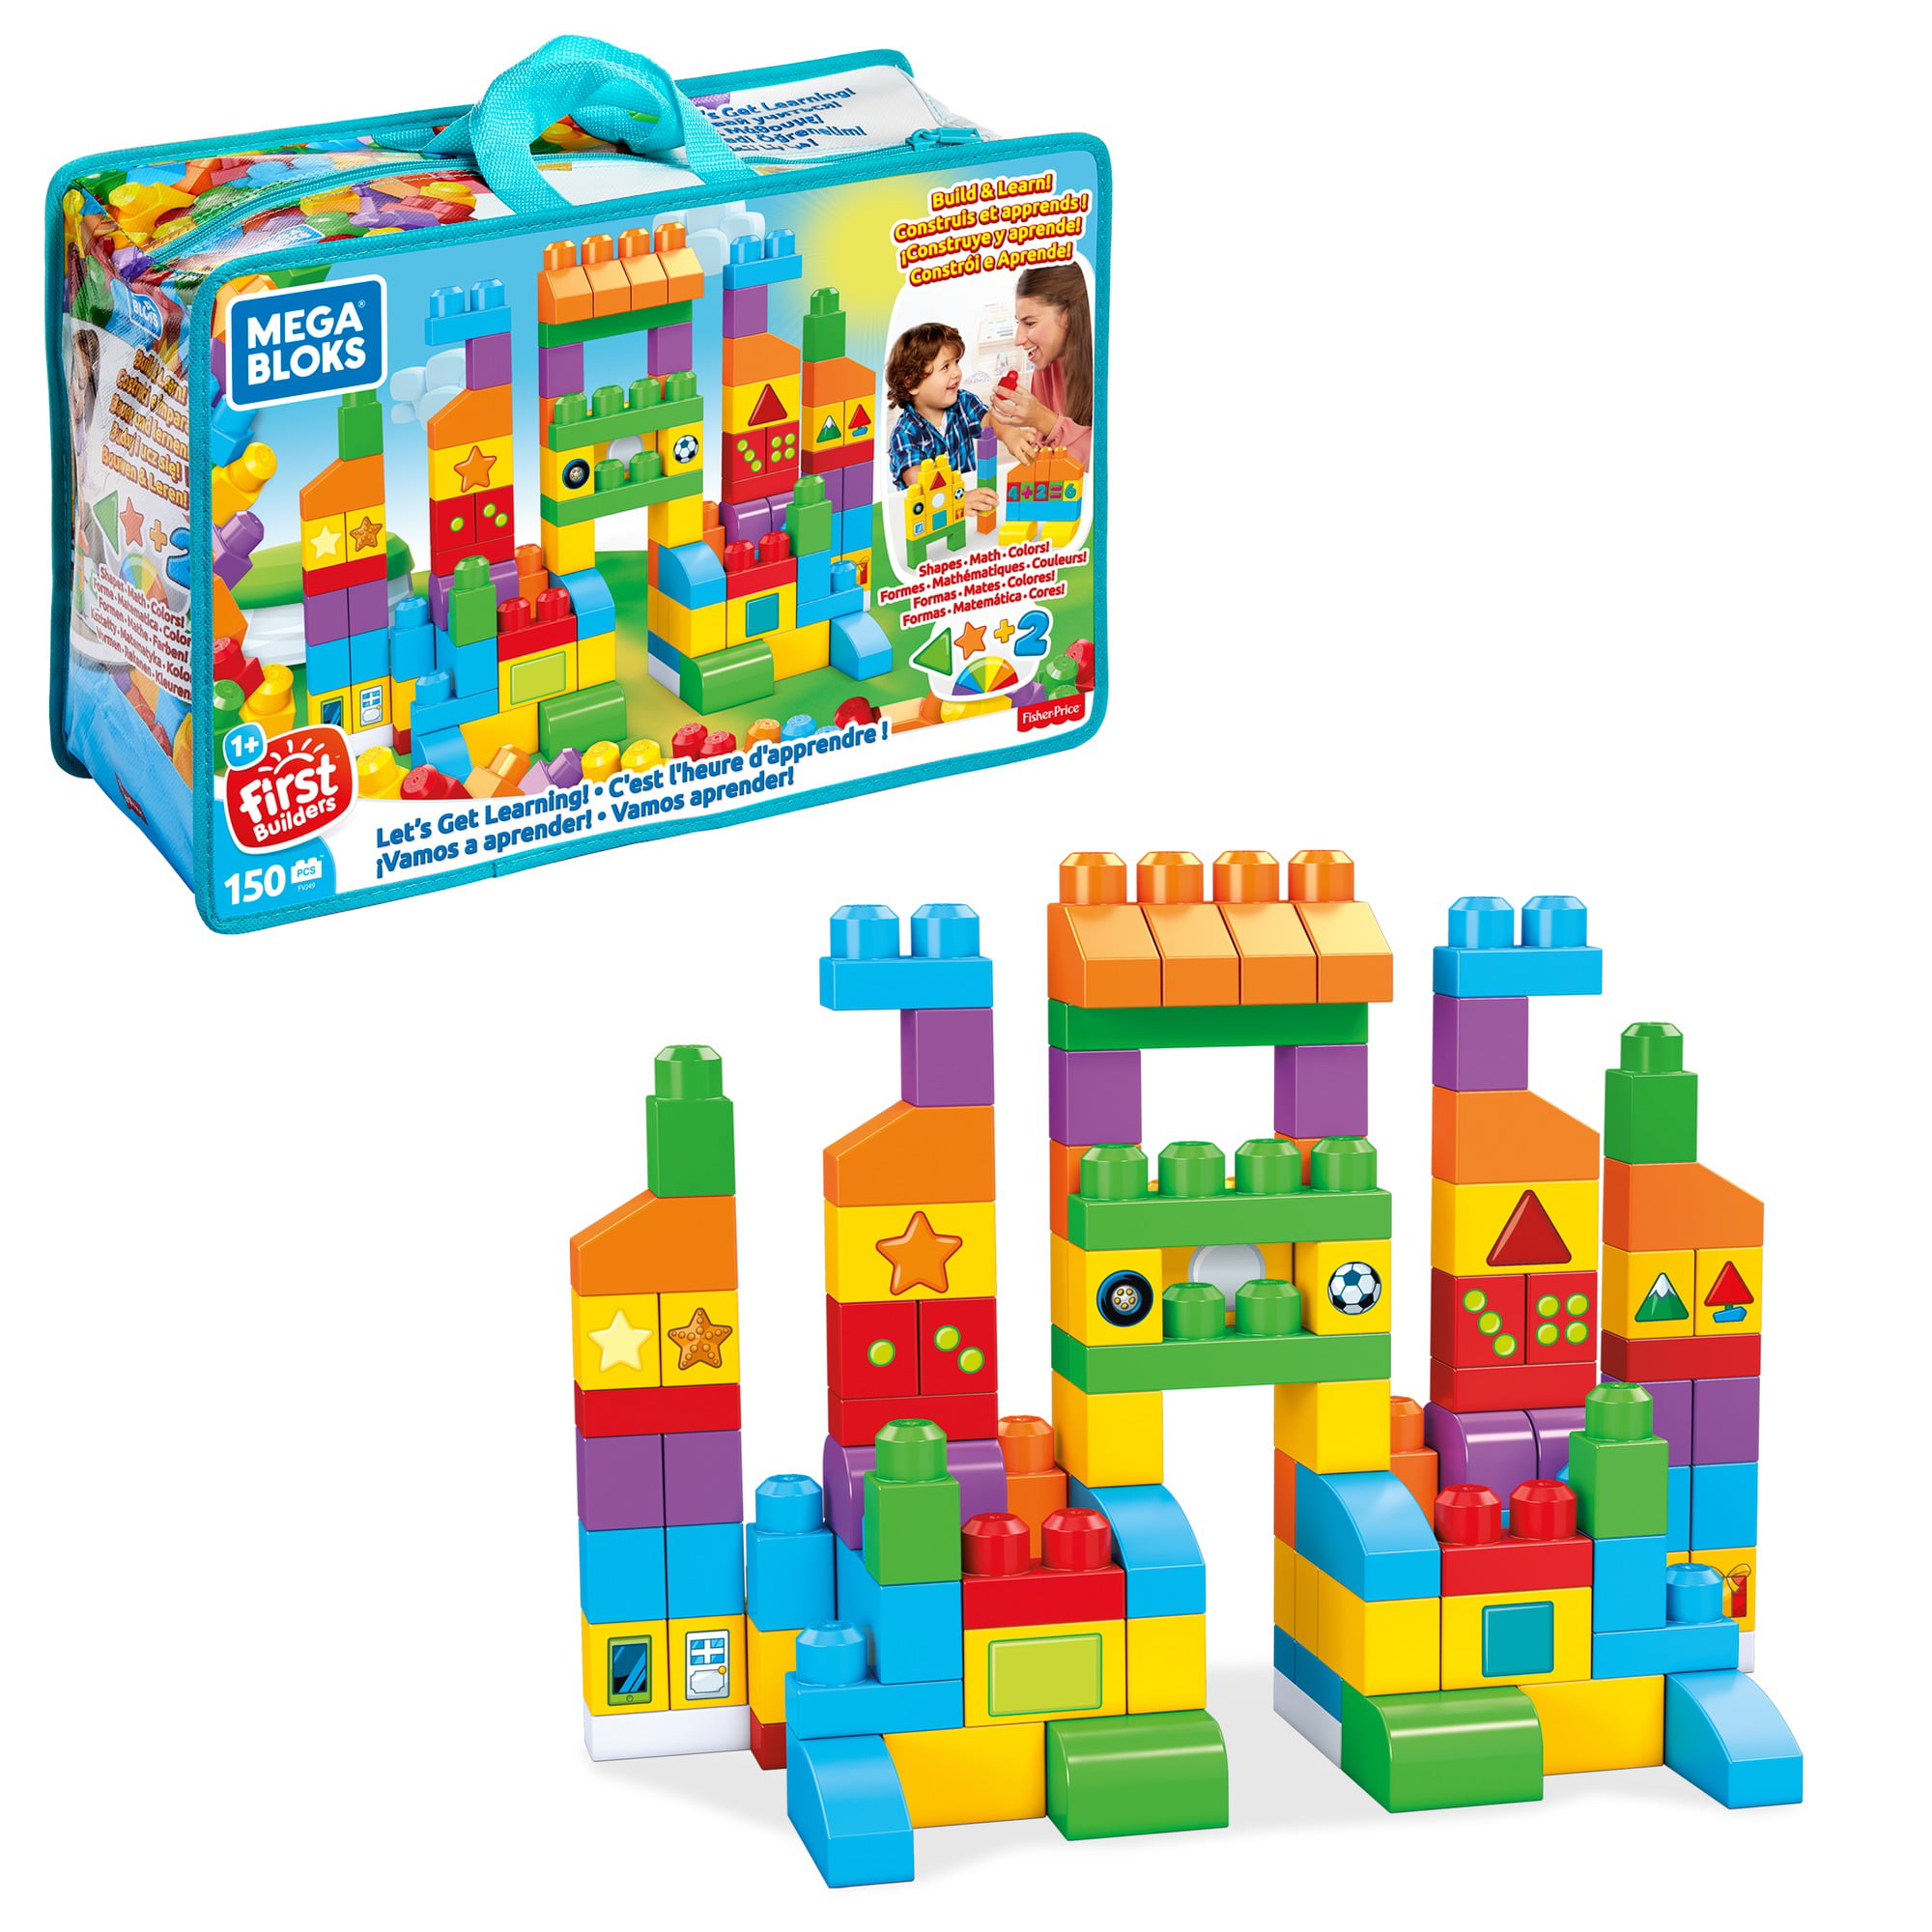 Toddler Wooden Colorful Shapes Construction Building Blocks Bricks Kids Play Toy 